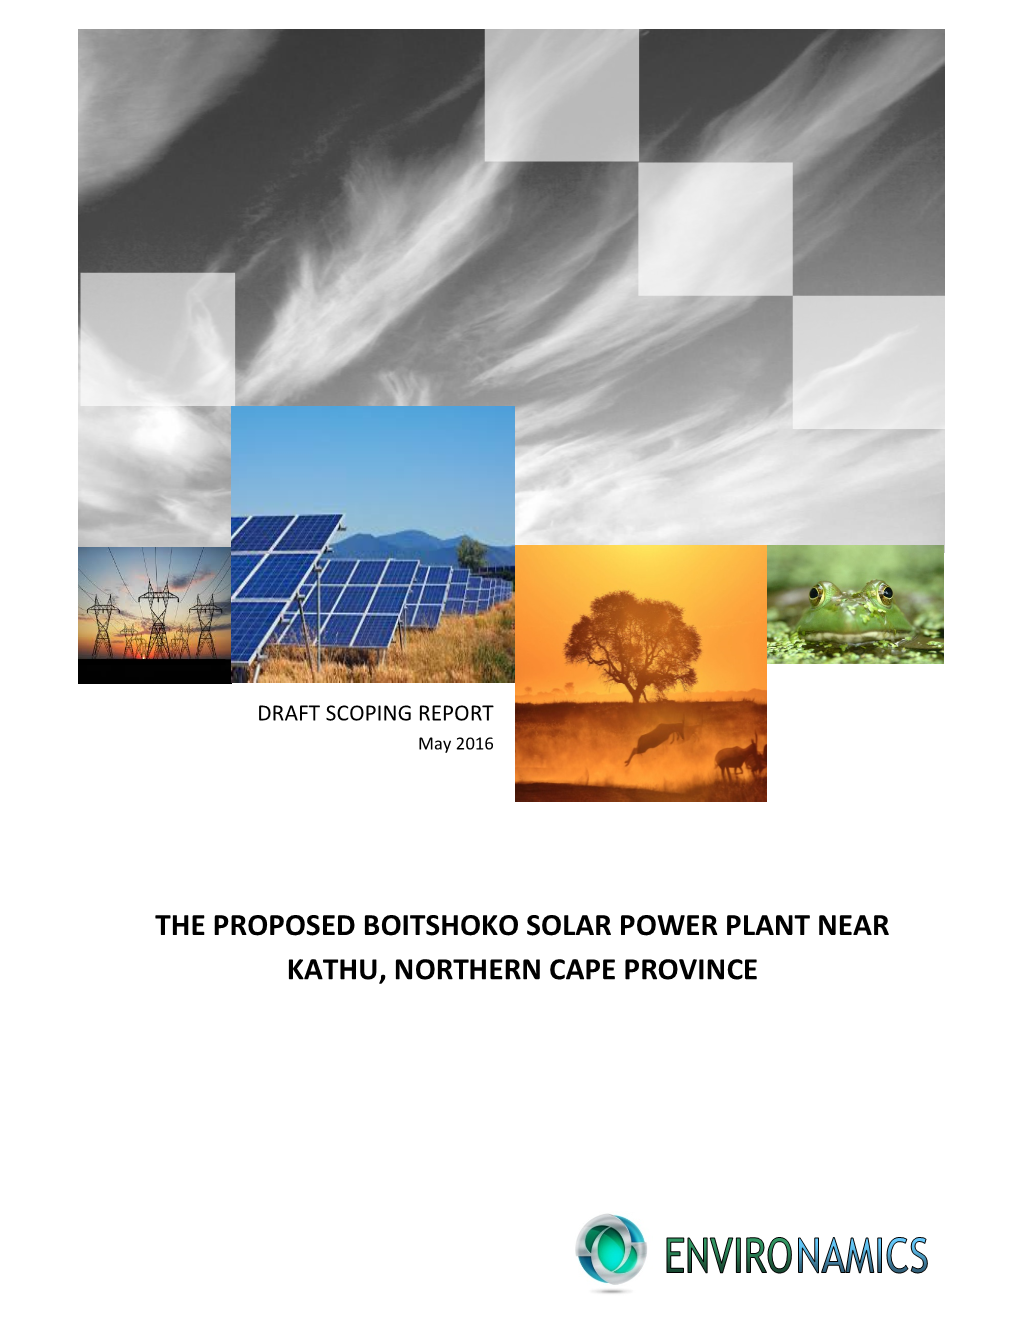 The Proposed Boitshoko Solar Power Plant Near Kathu, Northern Cape Province Project Detail